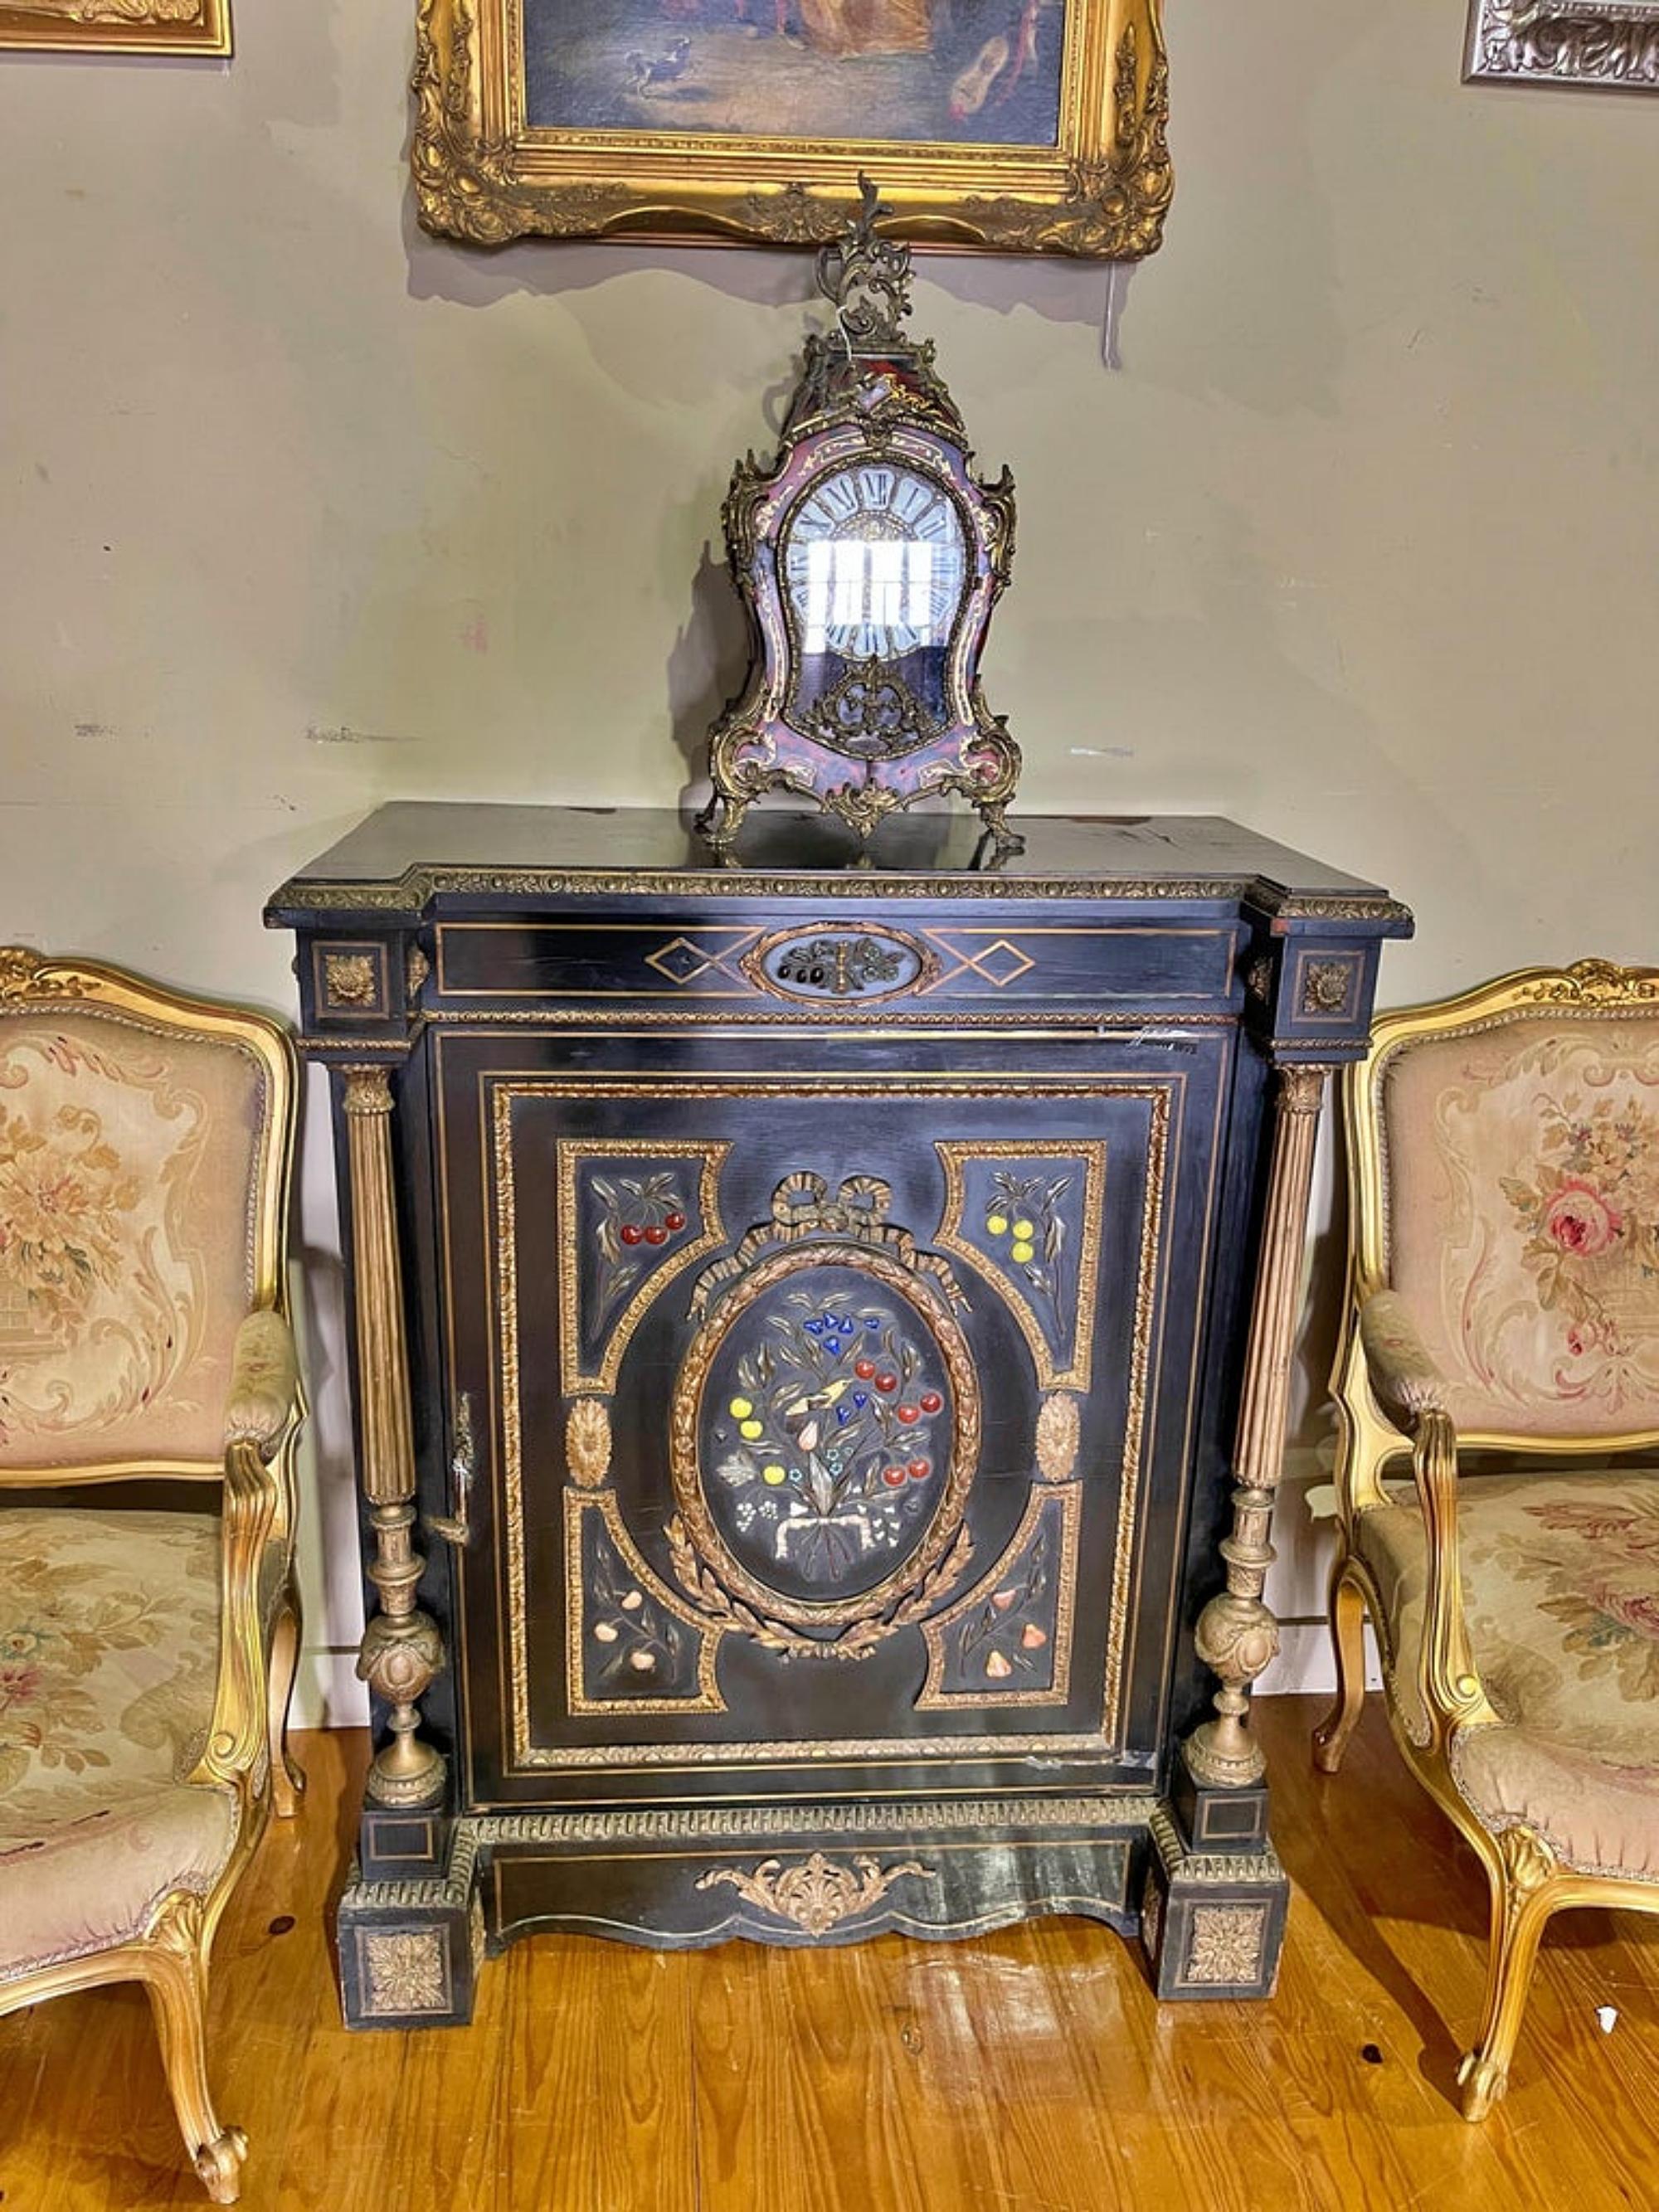 Pair of Napoleon III cabinets
French from the 18th century,
In ebonized wood decoration embedded in hard stones 